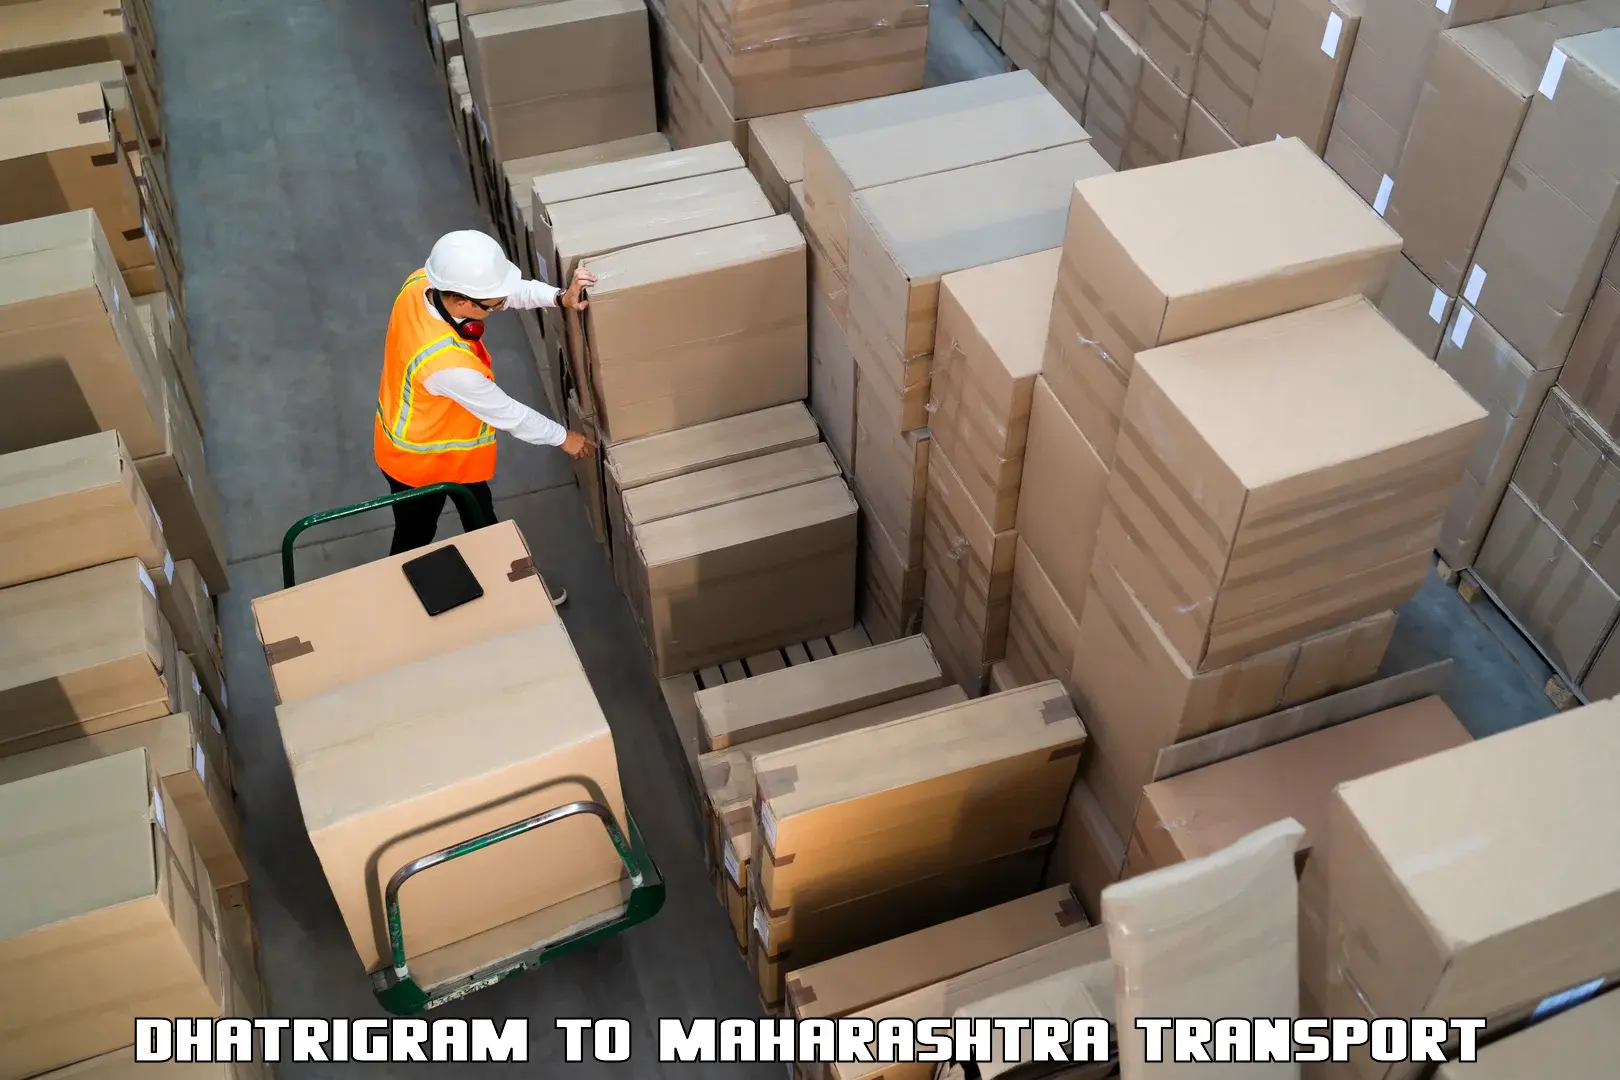 Road transport services Dhatrigram to Ambegaon